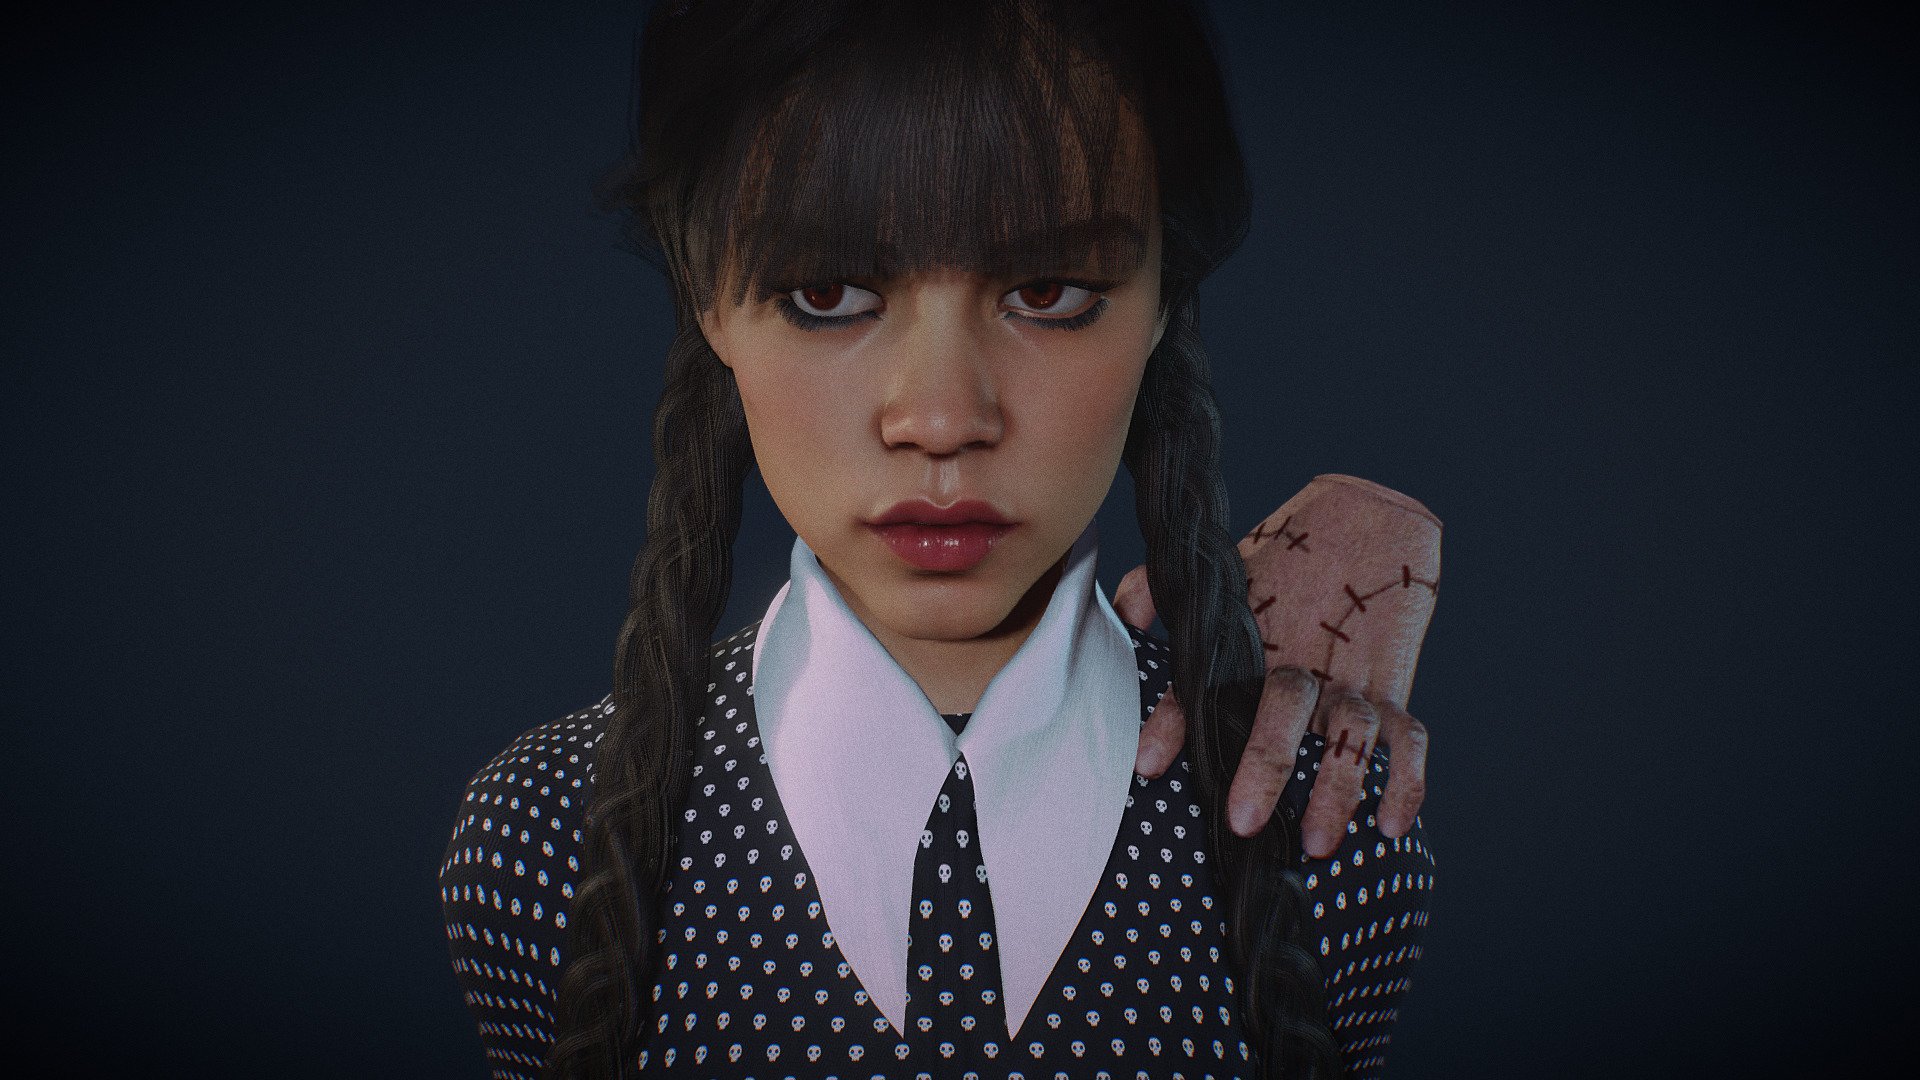 Wednesday Addams. Model in Blender file. Fully rigged. SSS subsurface scattering. mixamo bone names for animation 3d model